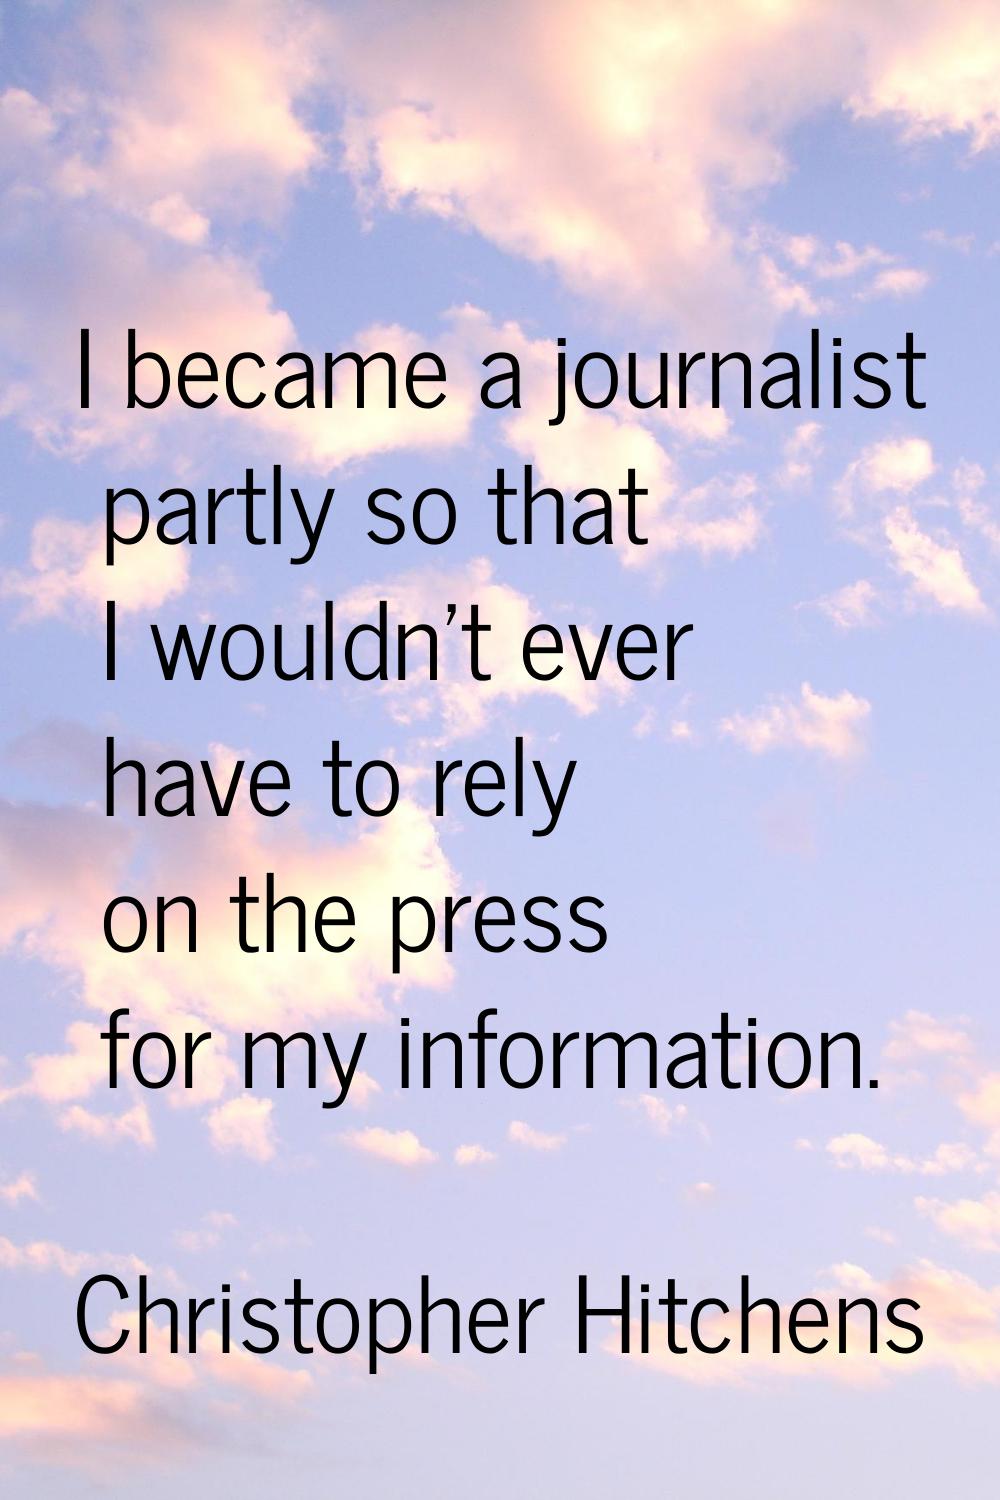 I became a journalist partly so that I wouldn't ever have to rely on the press for my information.